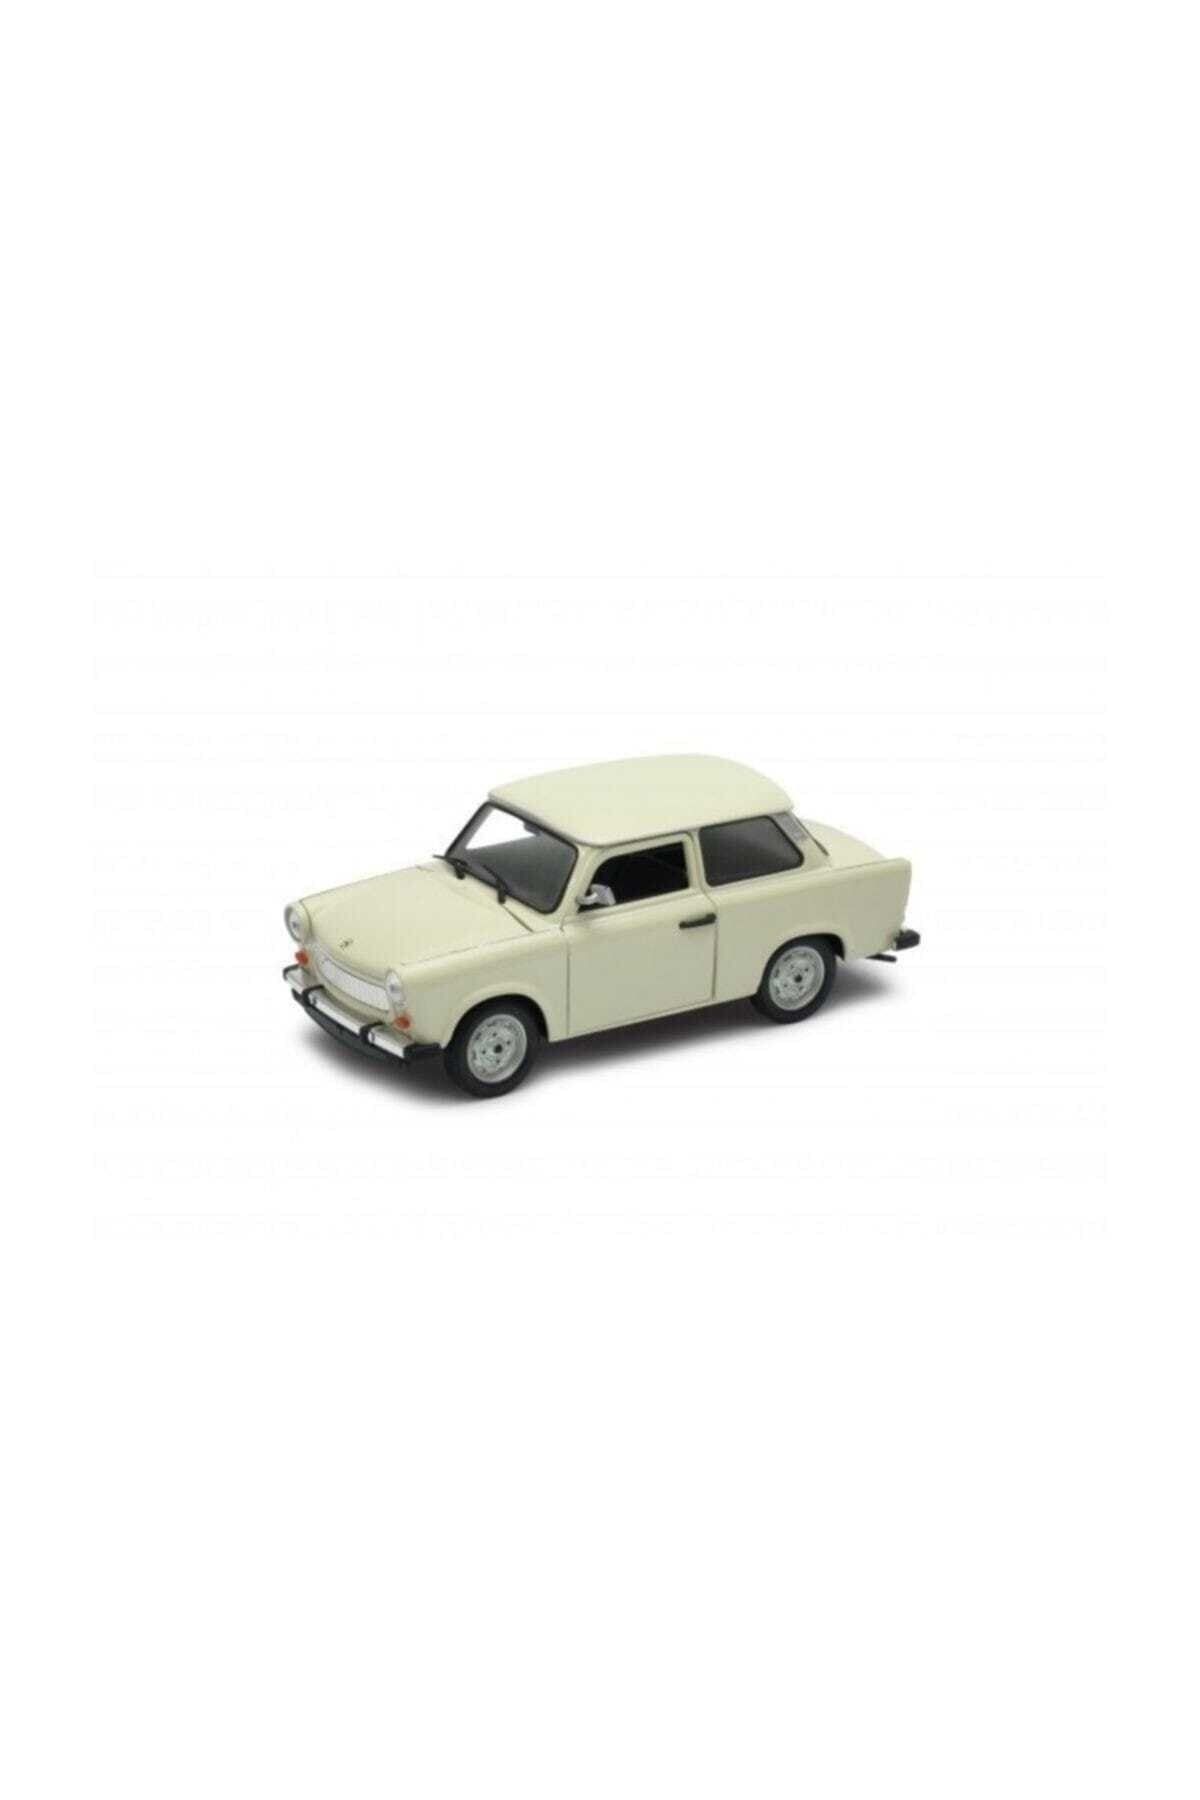 WELLY 1:24 Trabant 601